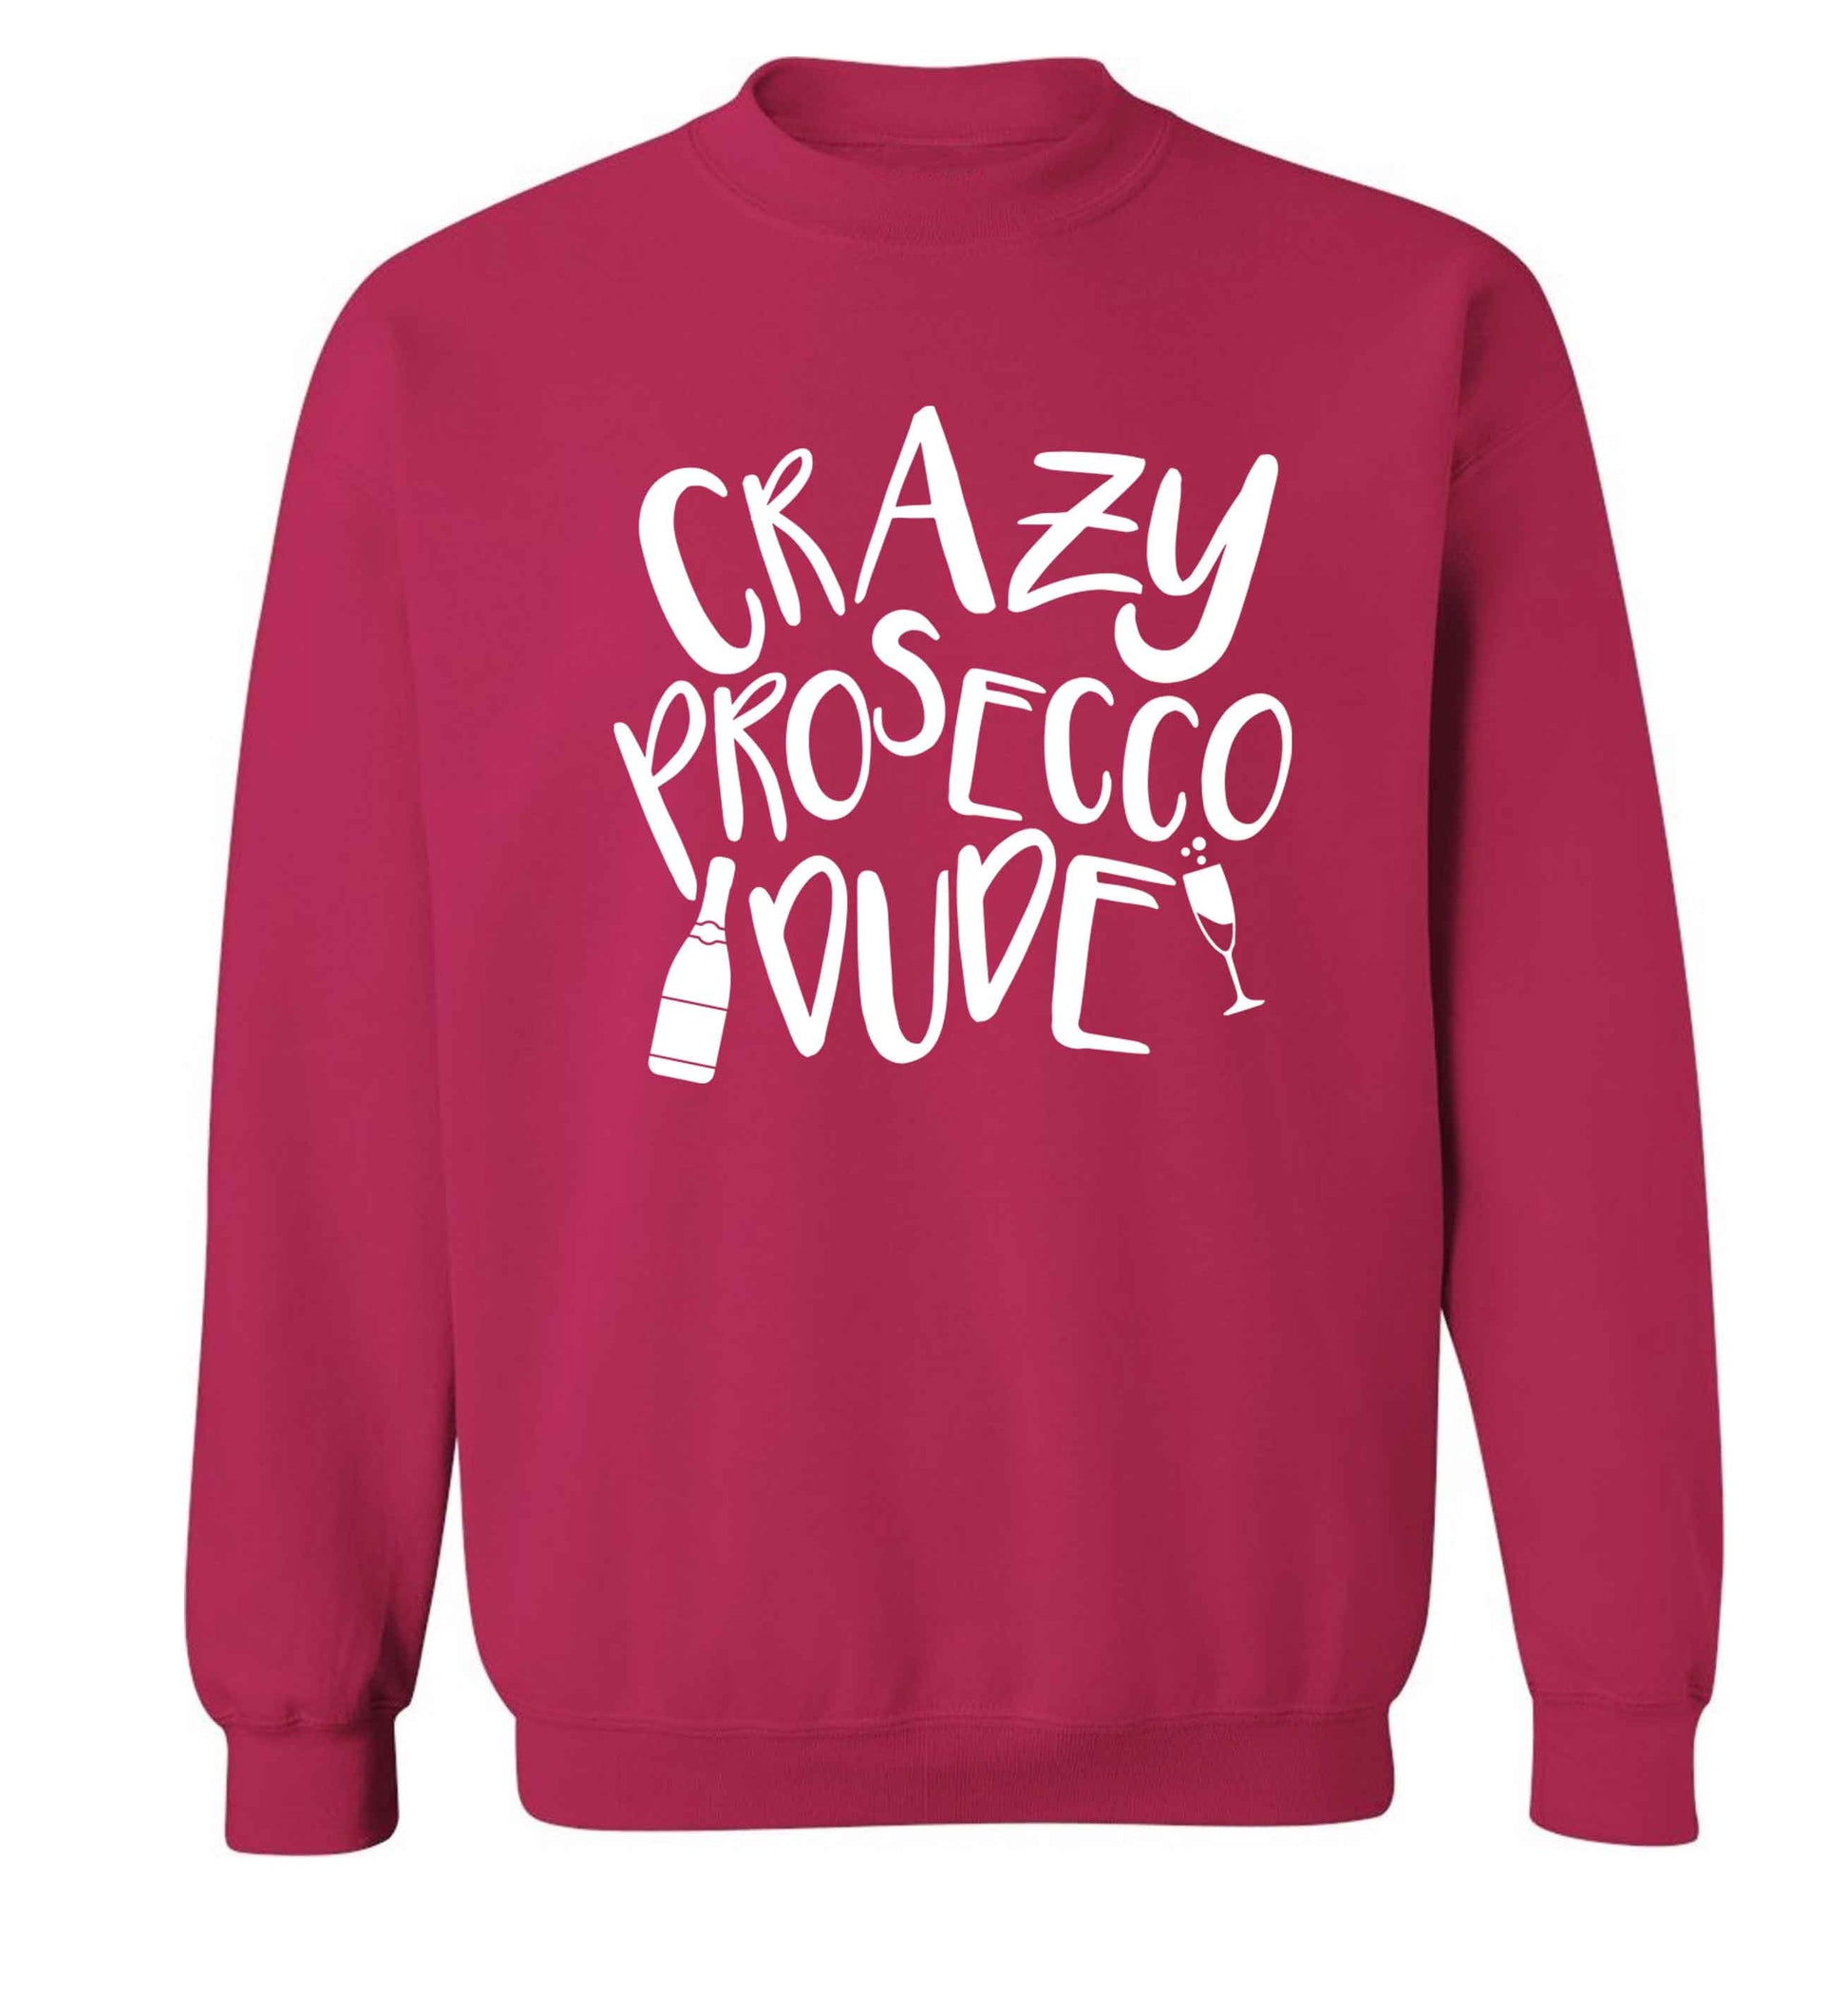 Crazy prosecco dude Adult's unisex pink Sweater 2XL